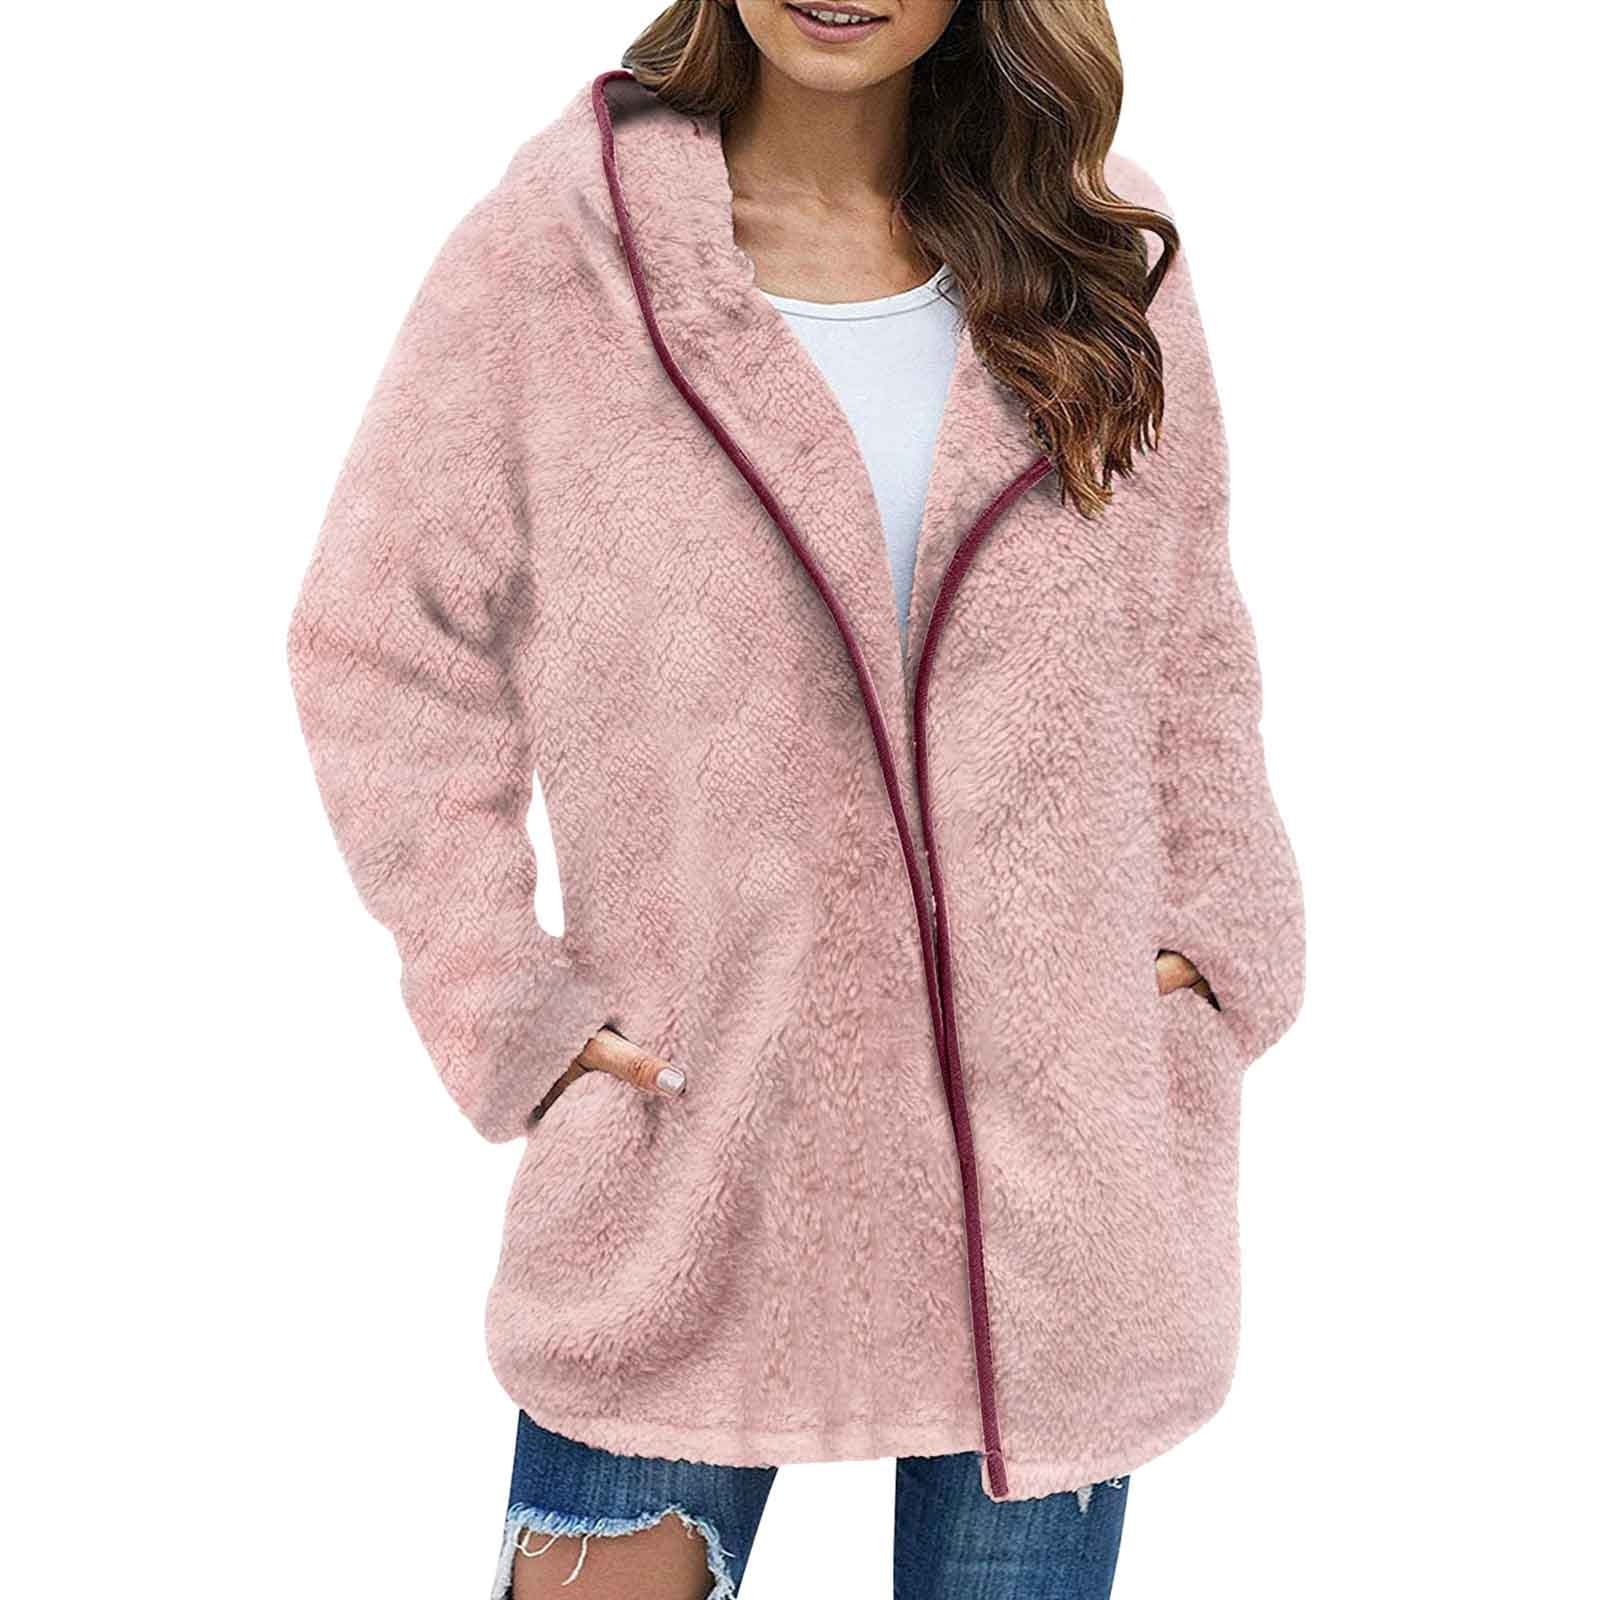 Shakumy Bed Jackets Women Casual Fashion Thick Solid Color Knit ...